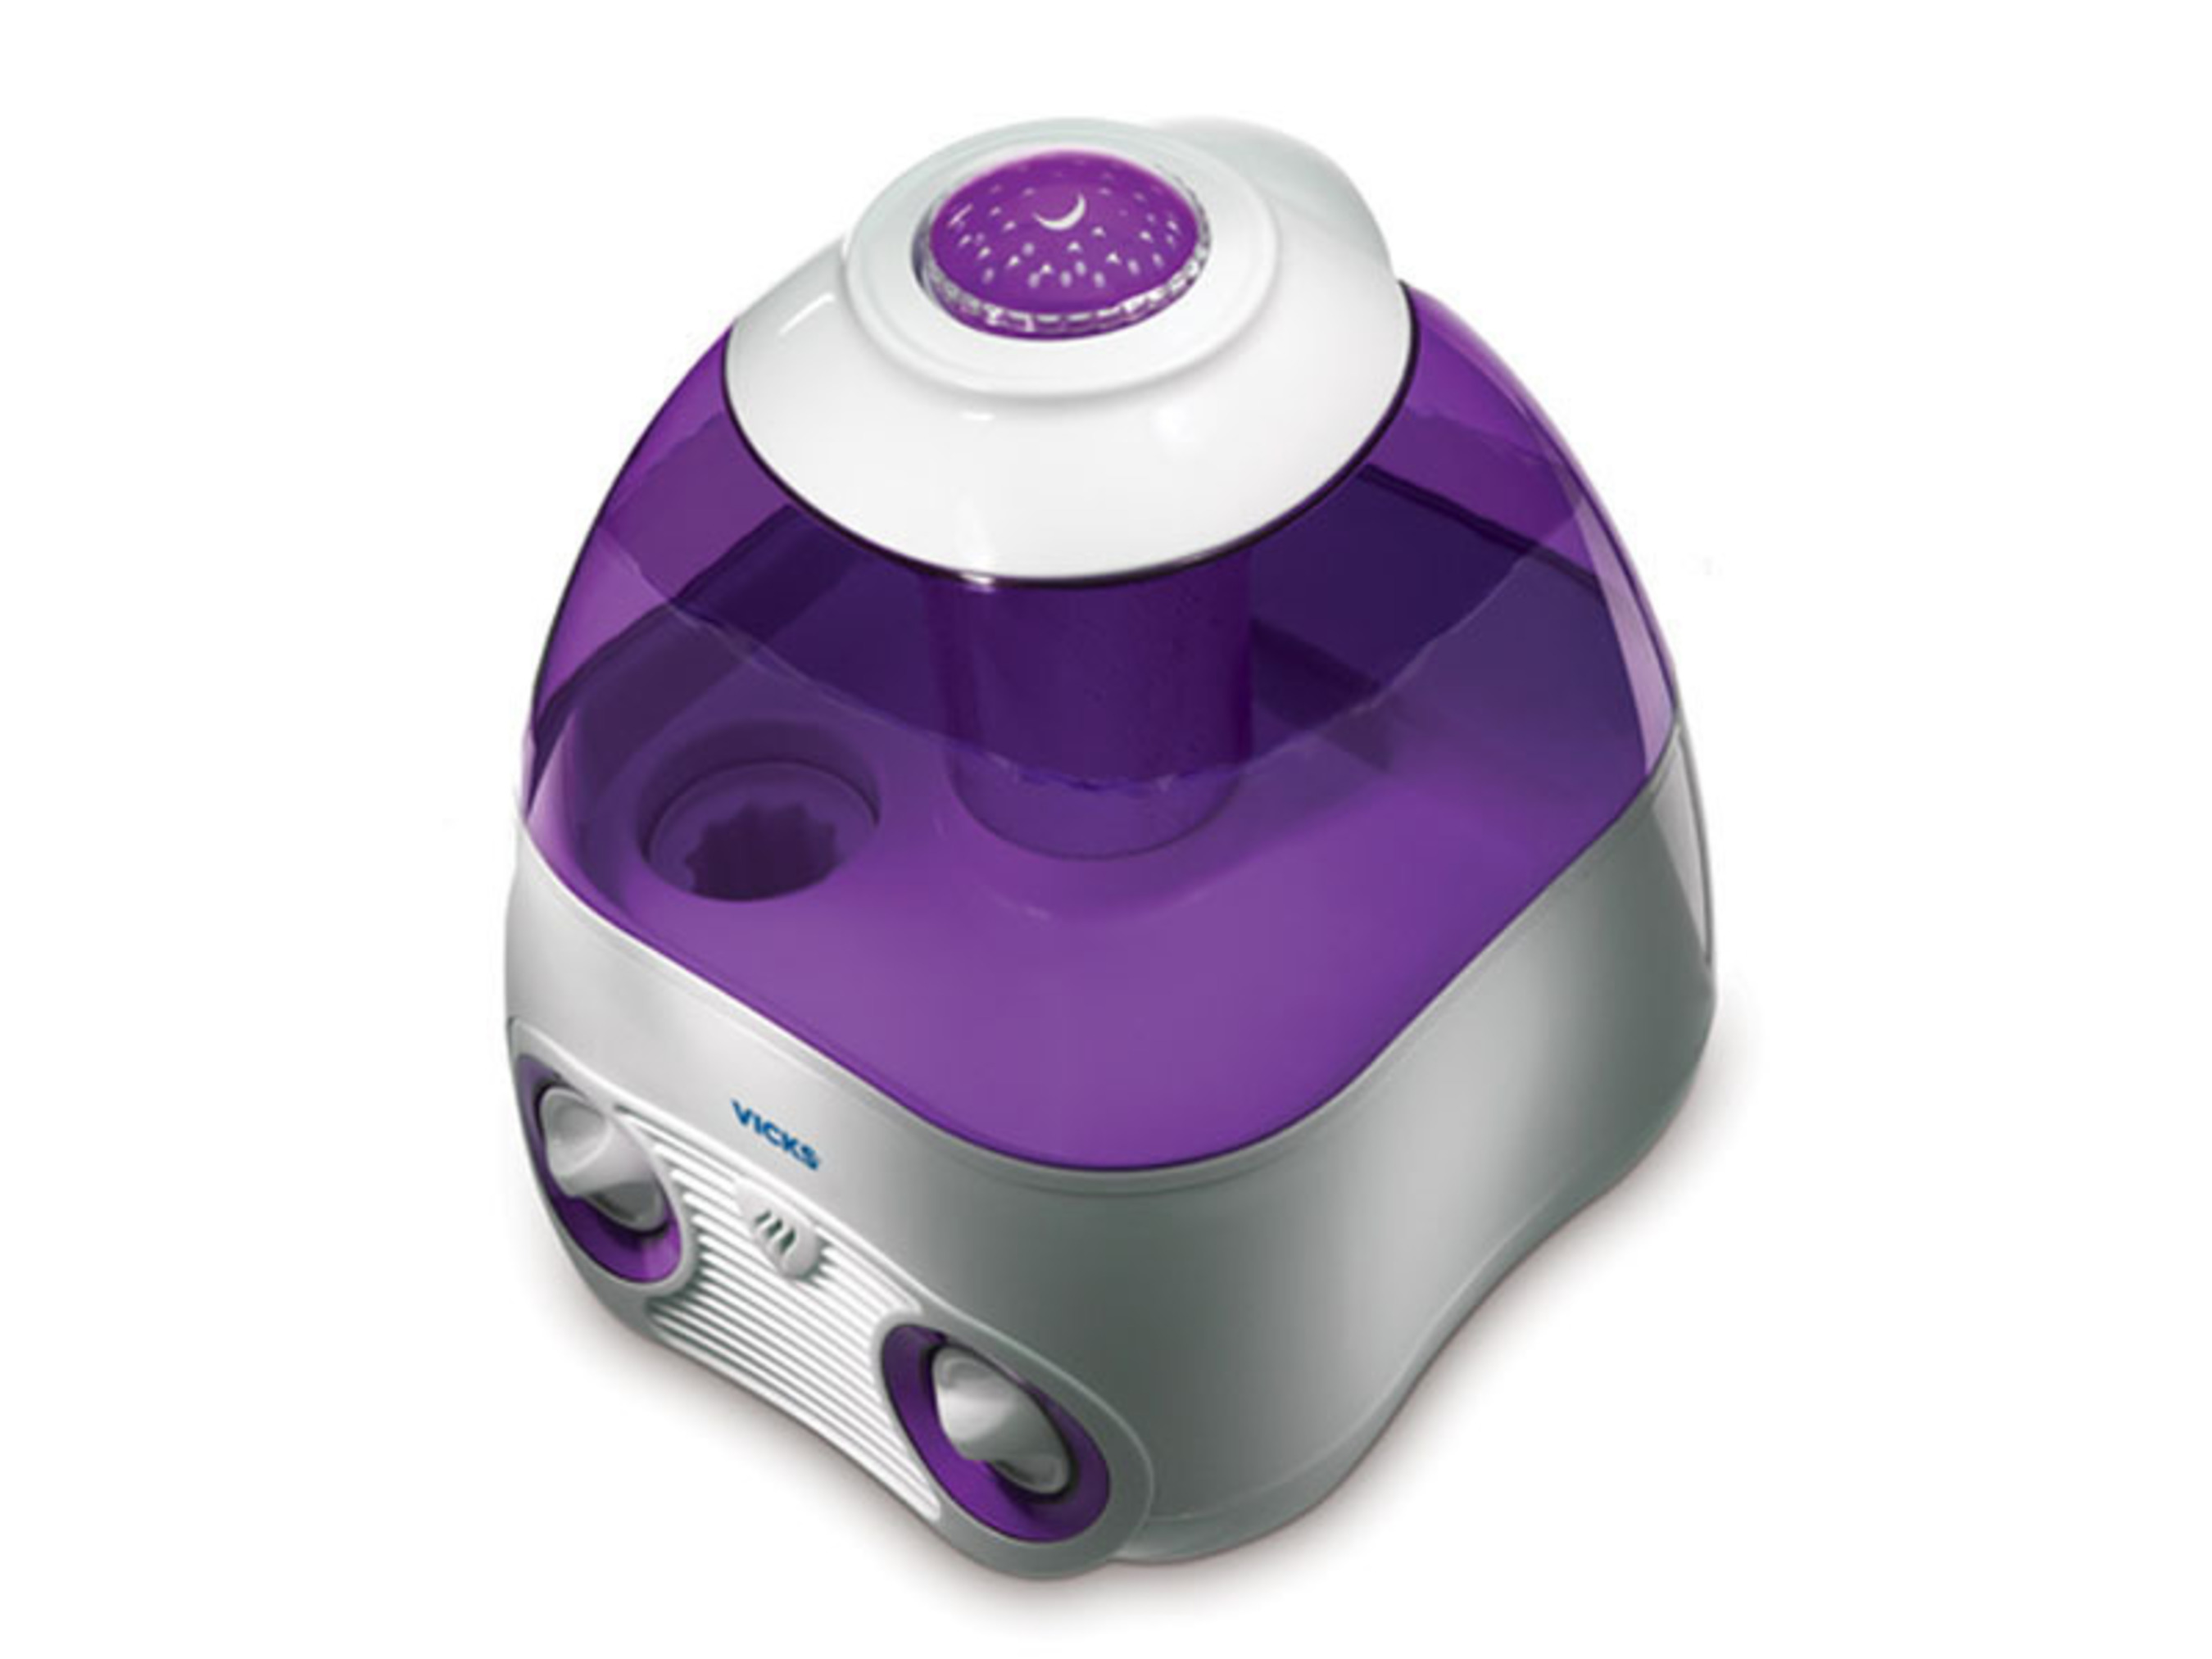 Vicks Starry Night Humidifier Available Now in New Colors Exclusively at  Babies